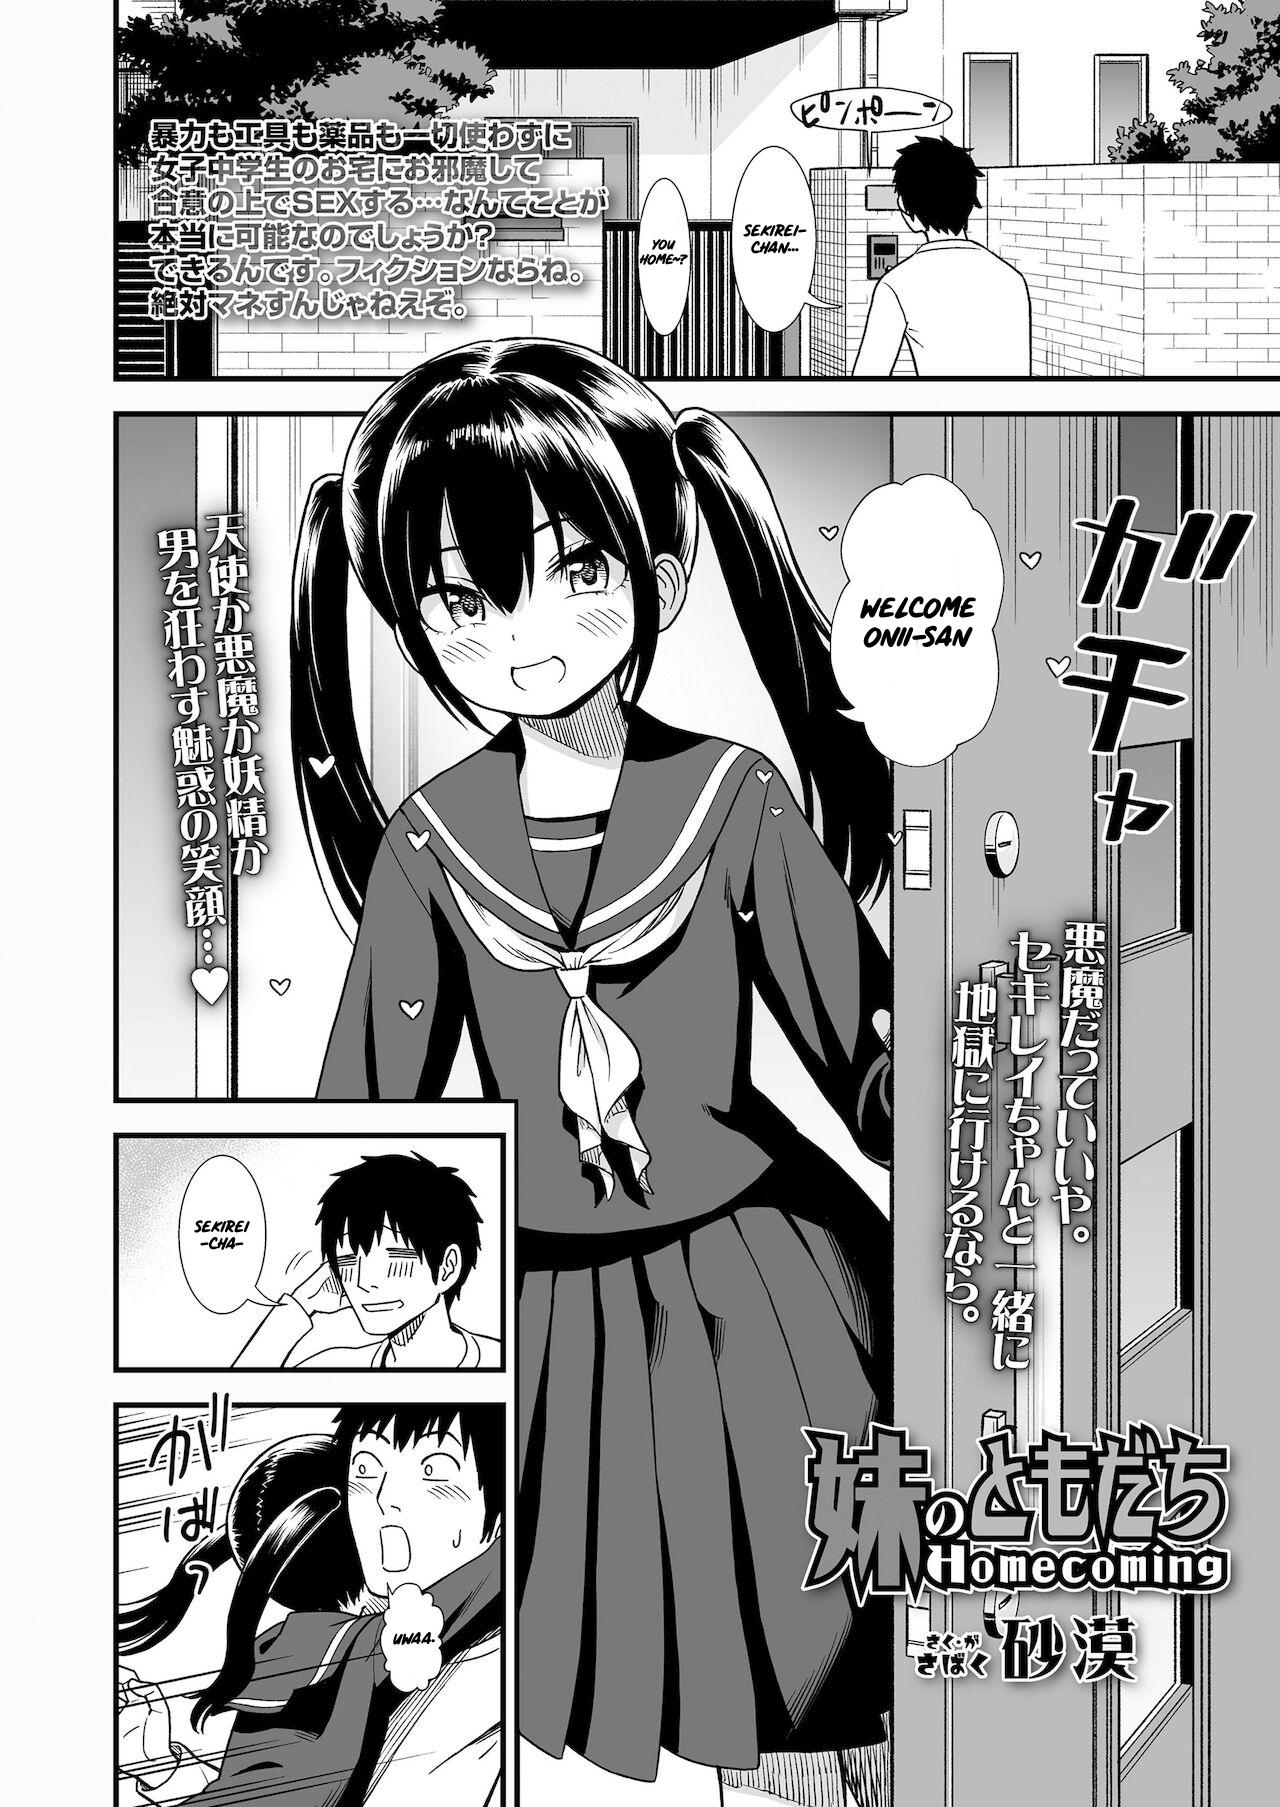 Long Hair Imouto no Tomodachi Homecoming | My Little Sister's Friend Homecoming Cum In Mouth - Page 2